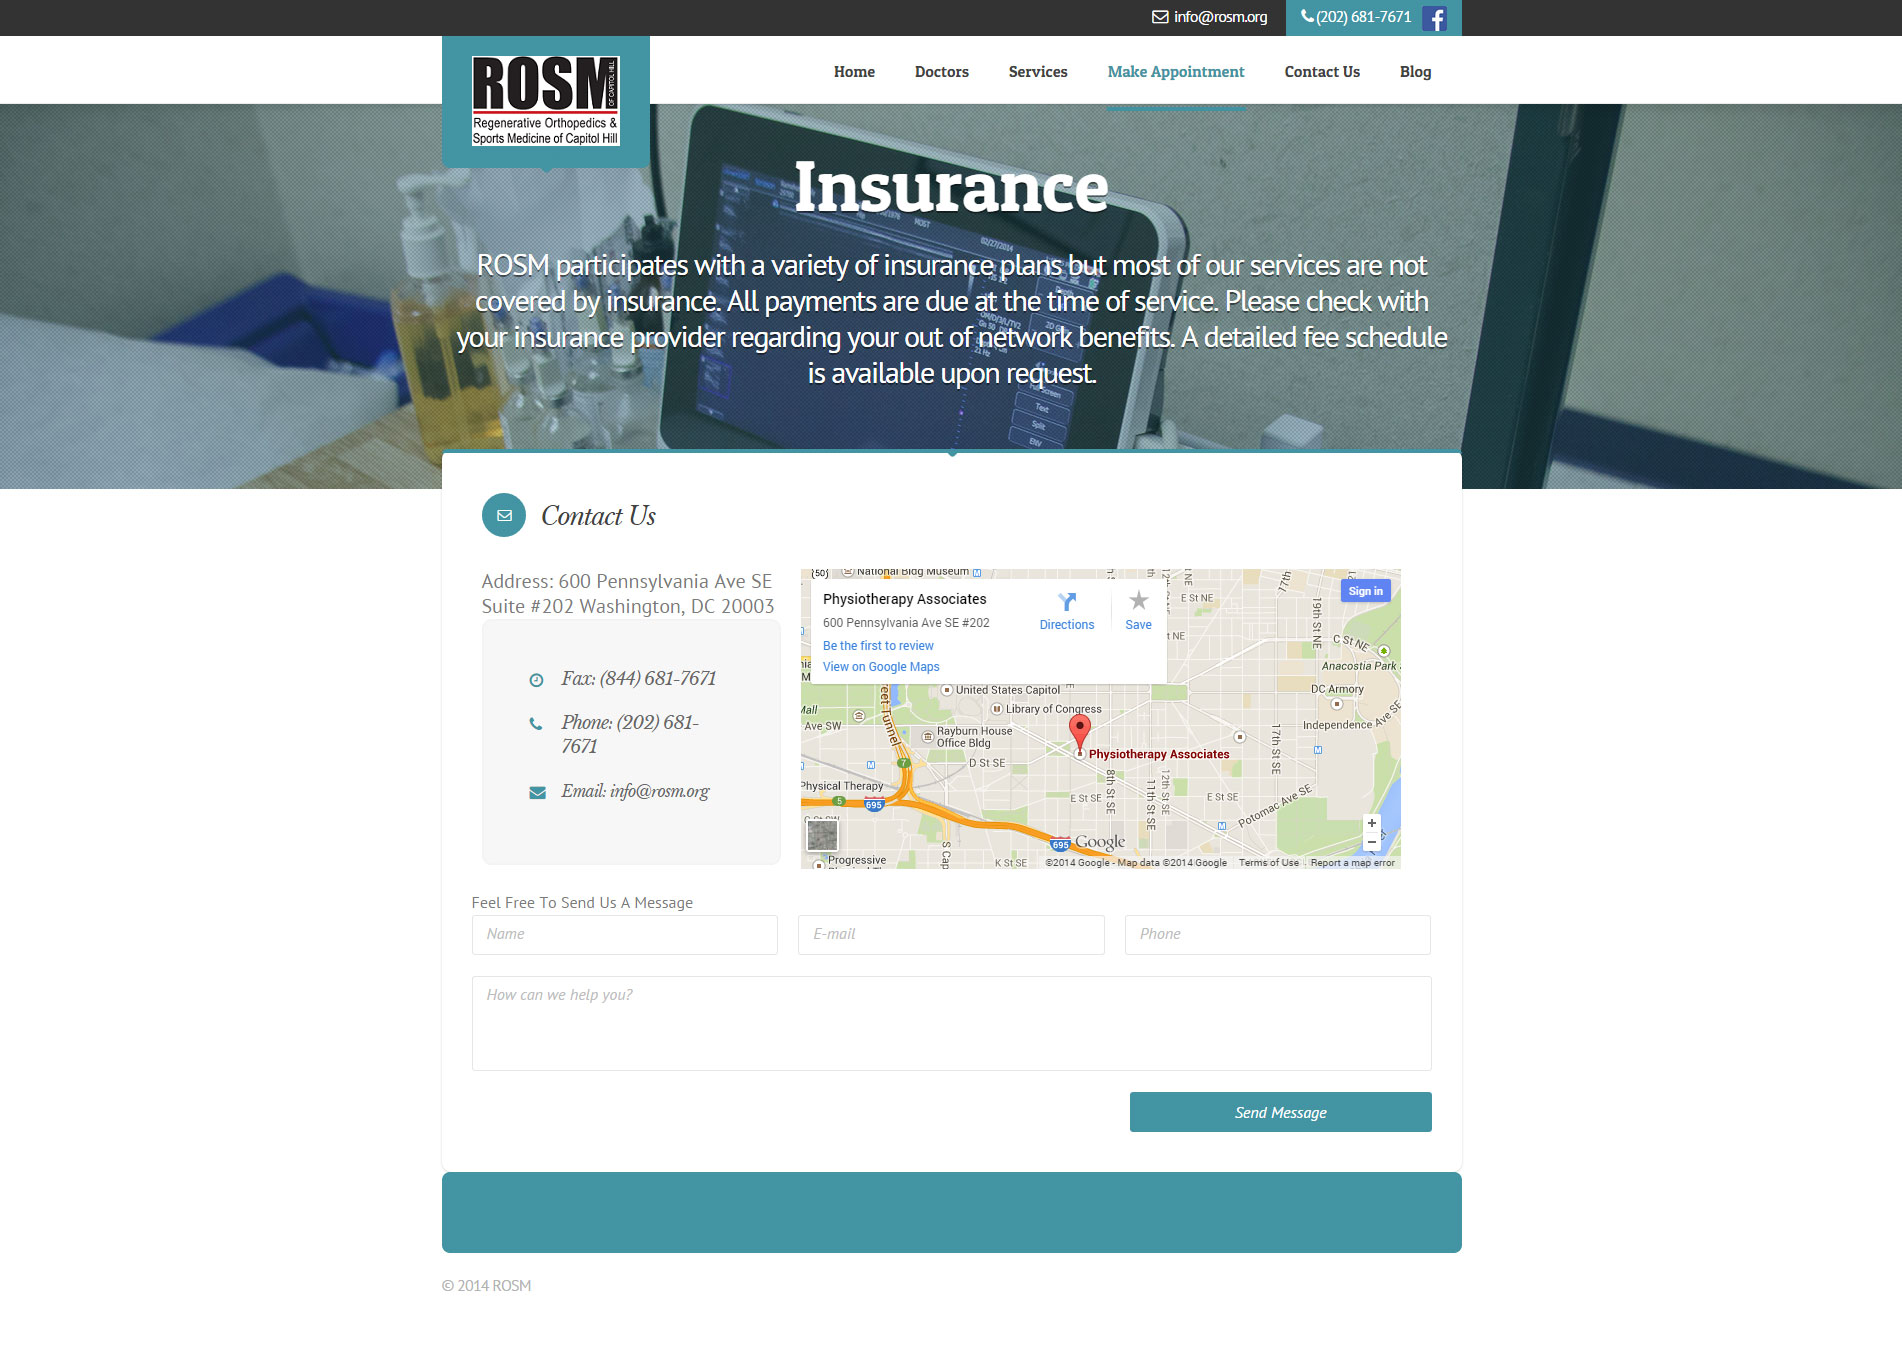 rosm contact page